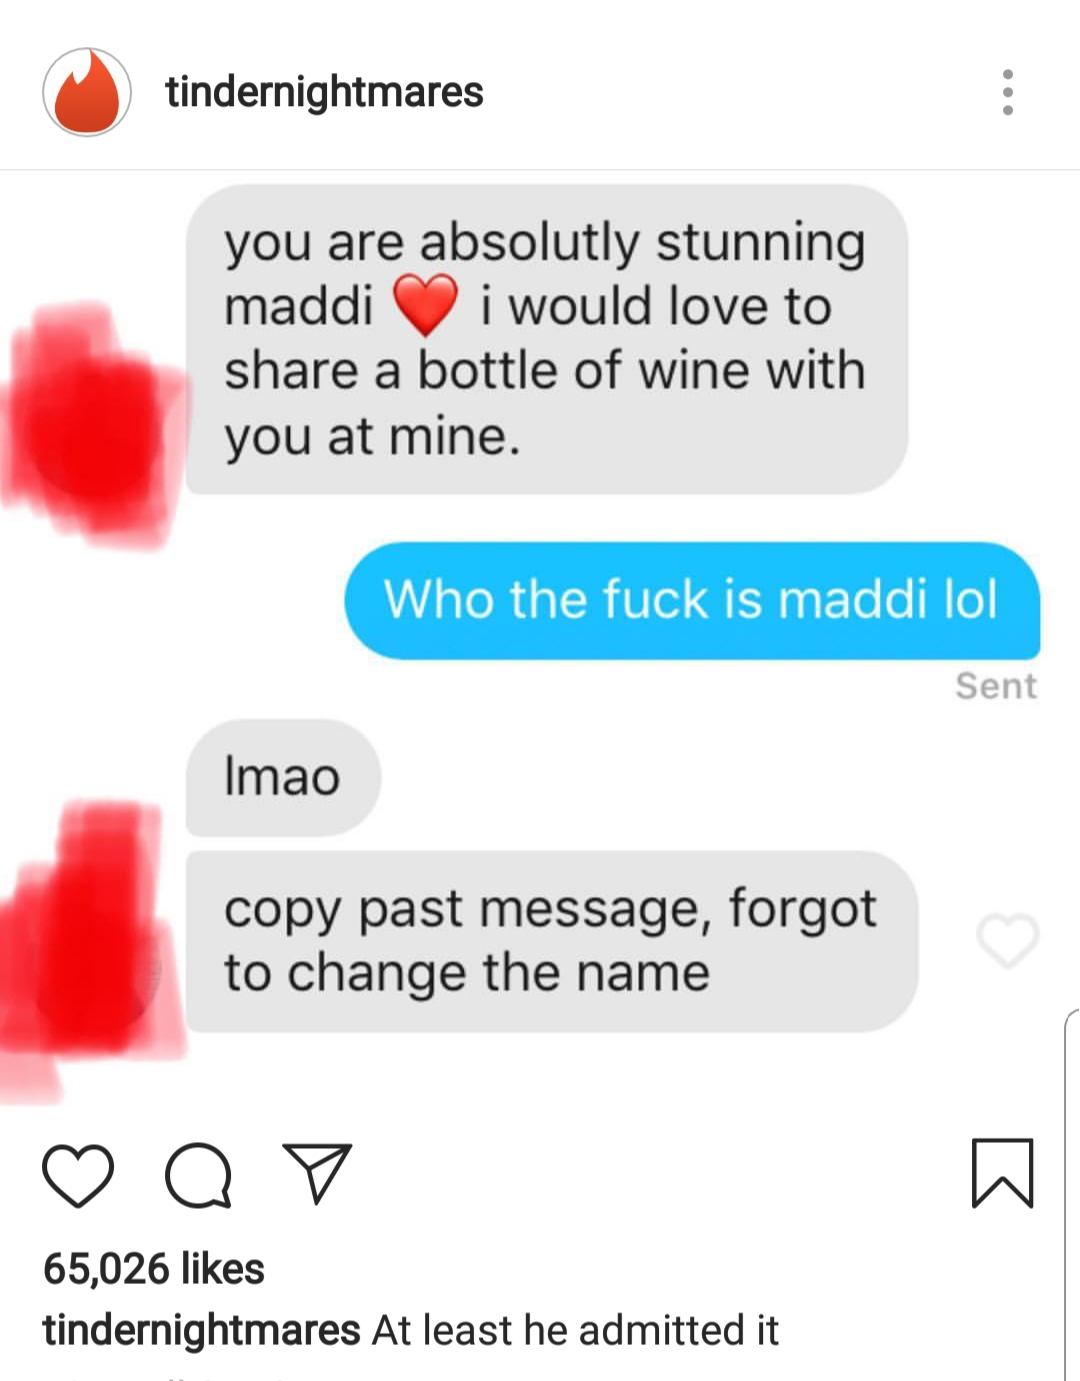 memes - web page - tindernightmares you are absolutly stunning maddi i would love to a bottle of wine with you at mine. Who the fuck is maddi lol Sent Imao copy past message, forgot to change the name Op 65,026 tindernightmares At least he admitted it